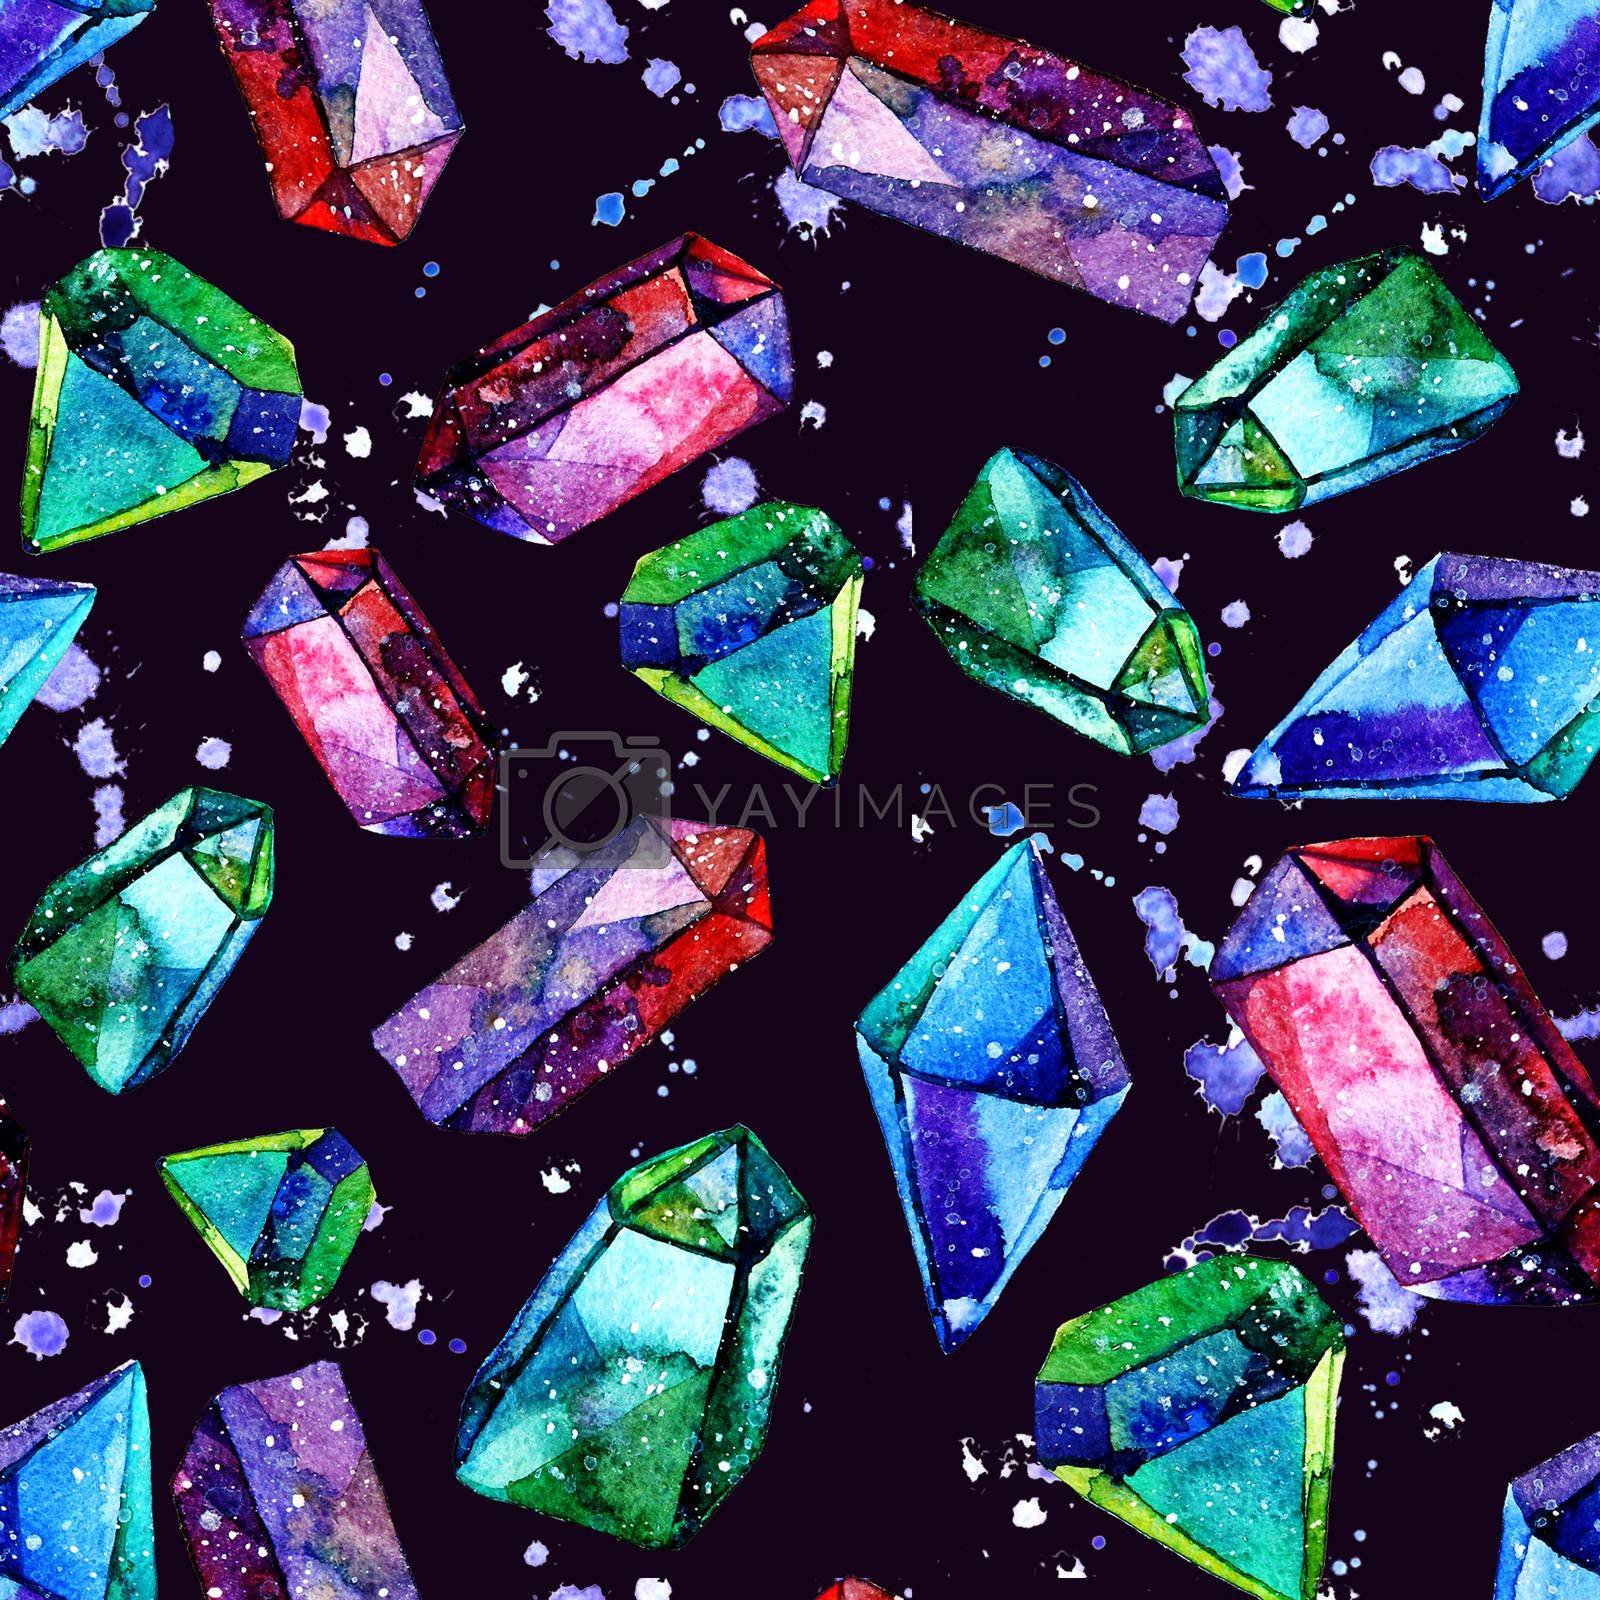 Royalty free image of Watercolor illustration of diamond crystals - seamless pattern by DesignAB